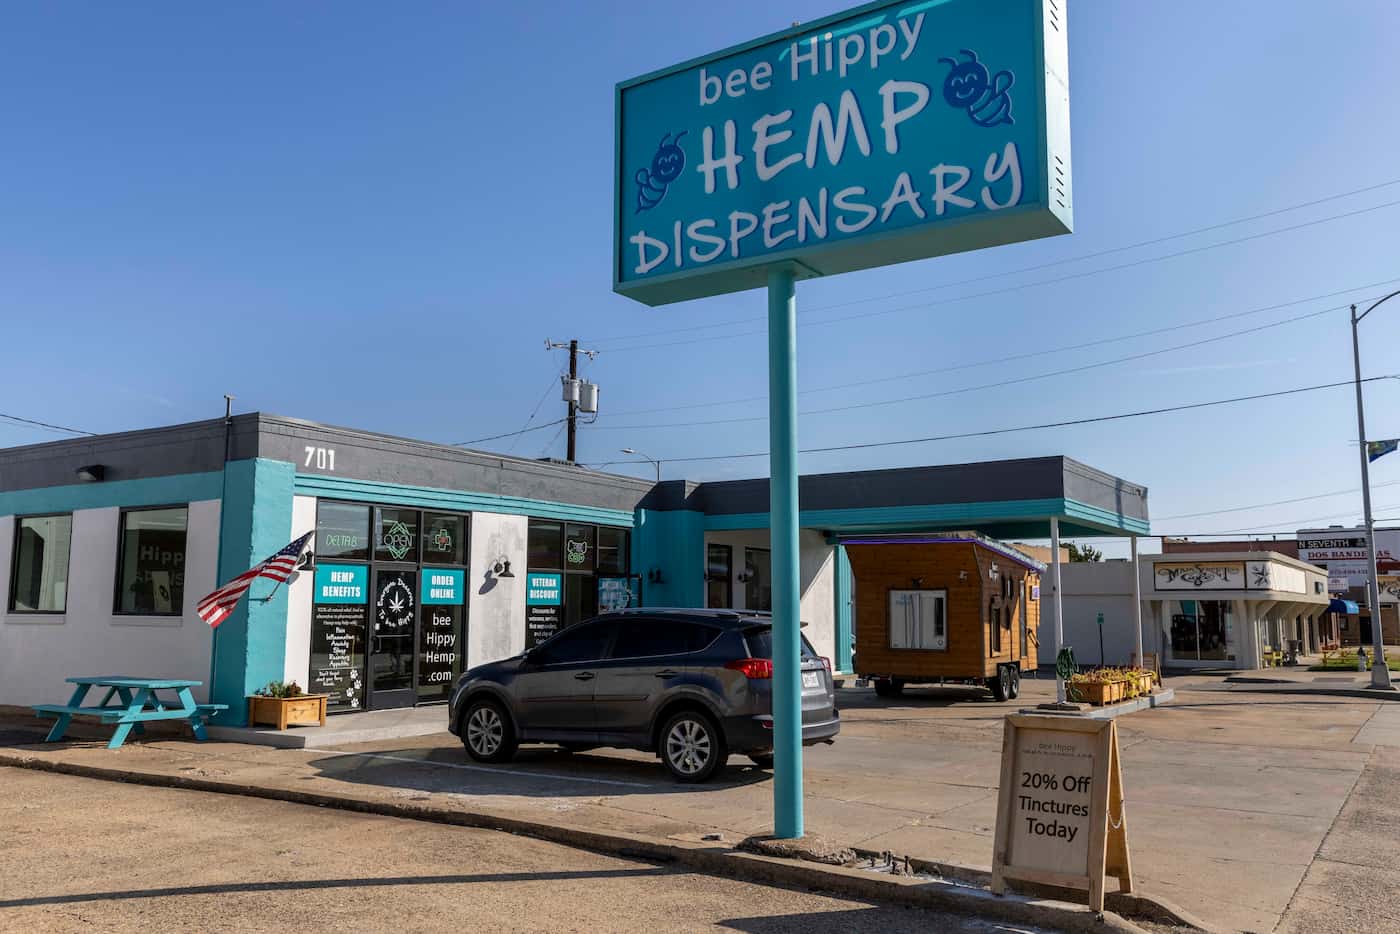 Chris Fagan opened up his Bee Hippy Hemp Dispensary, in downtown Garland at 701 Main St., in...